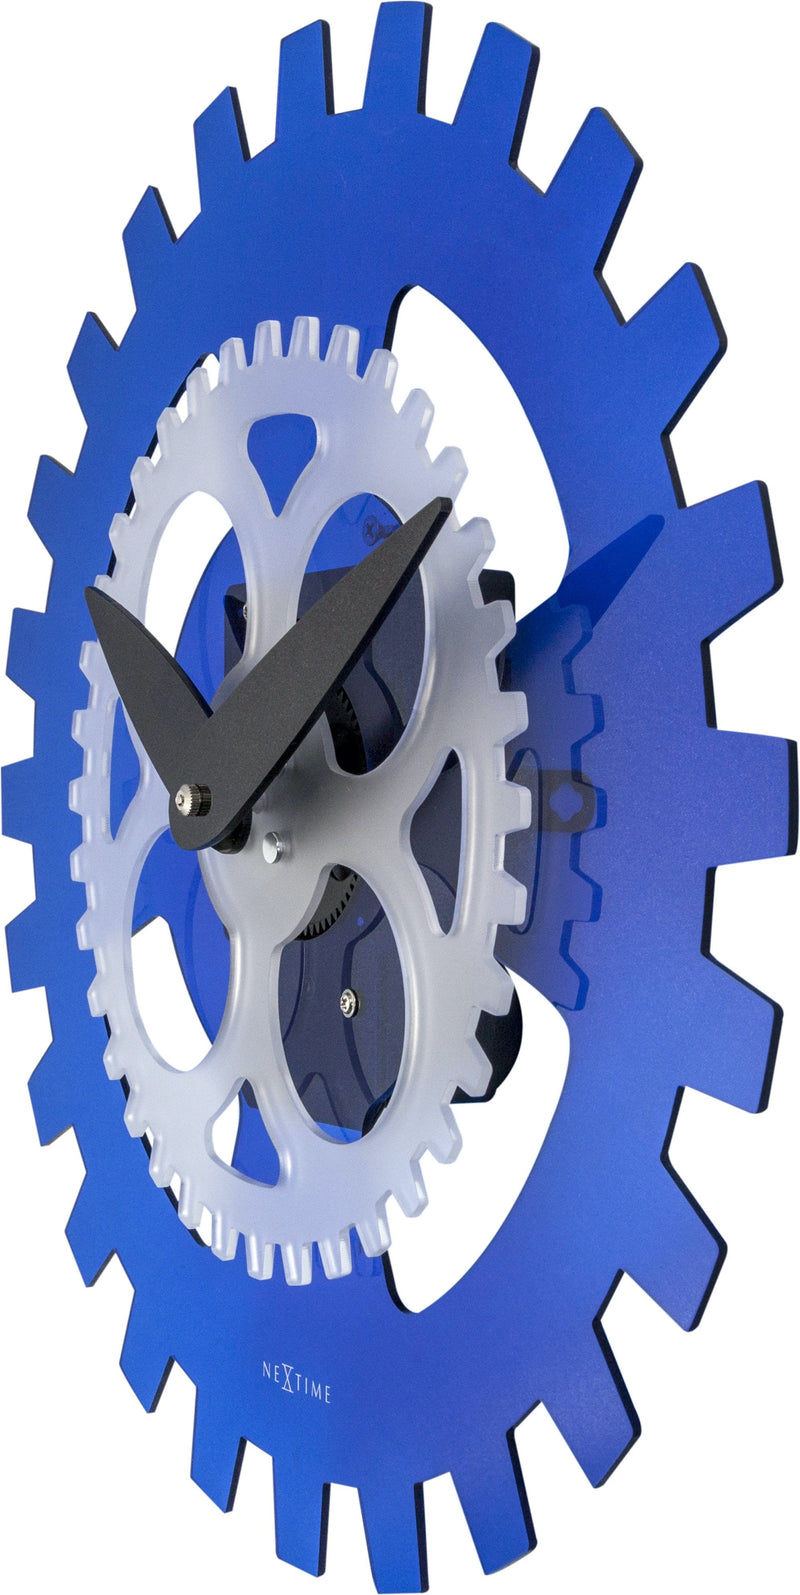 rightside 3241BL,Moving Gears,NeXtime,Acrylic,Blue,